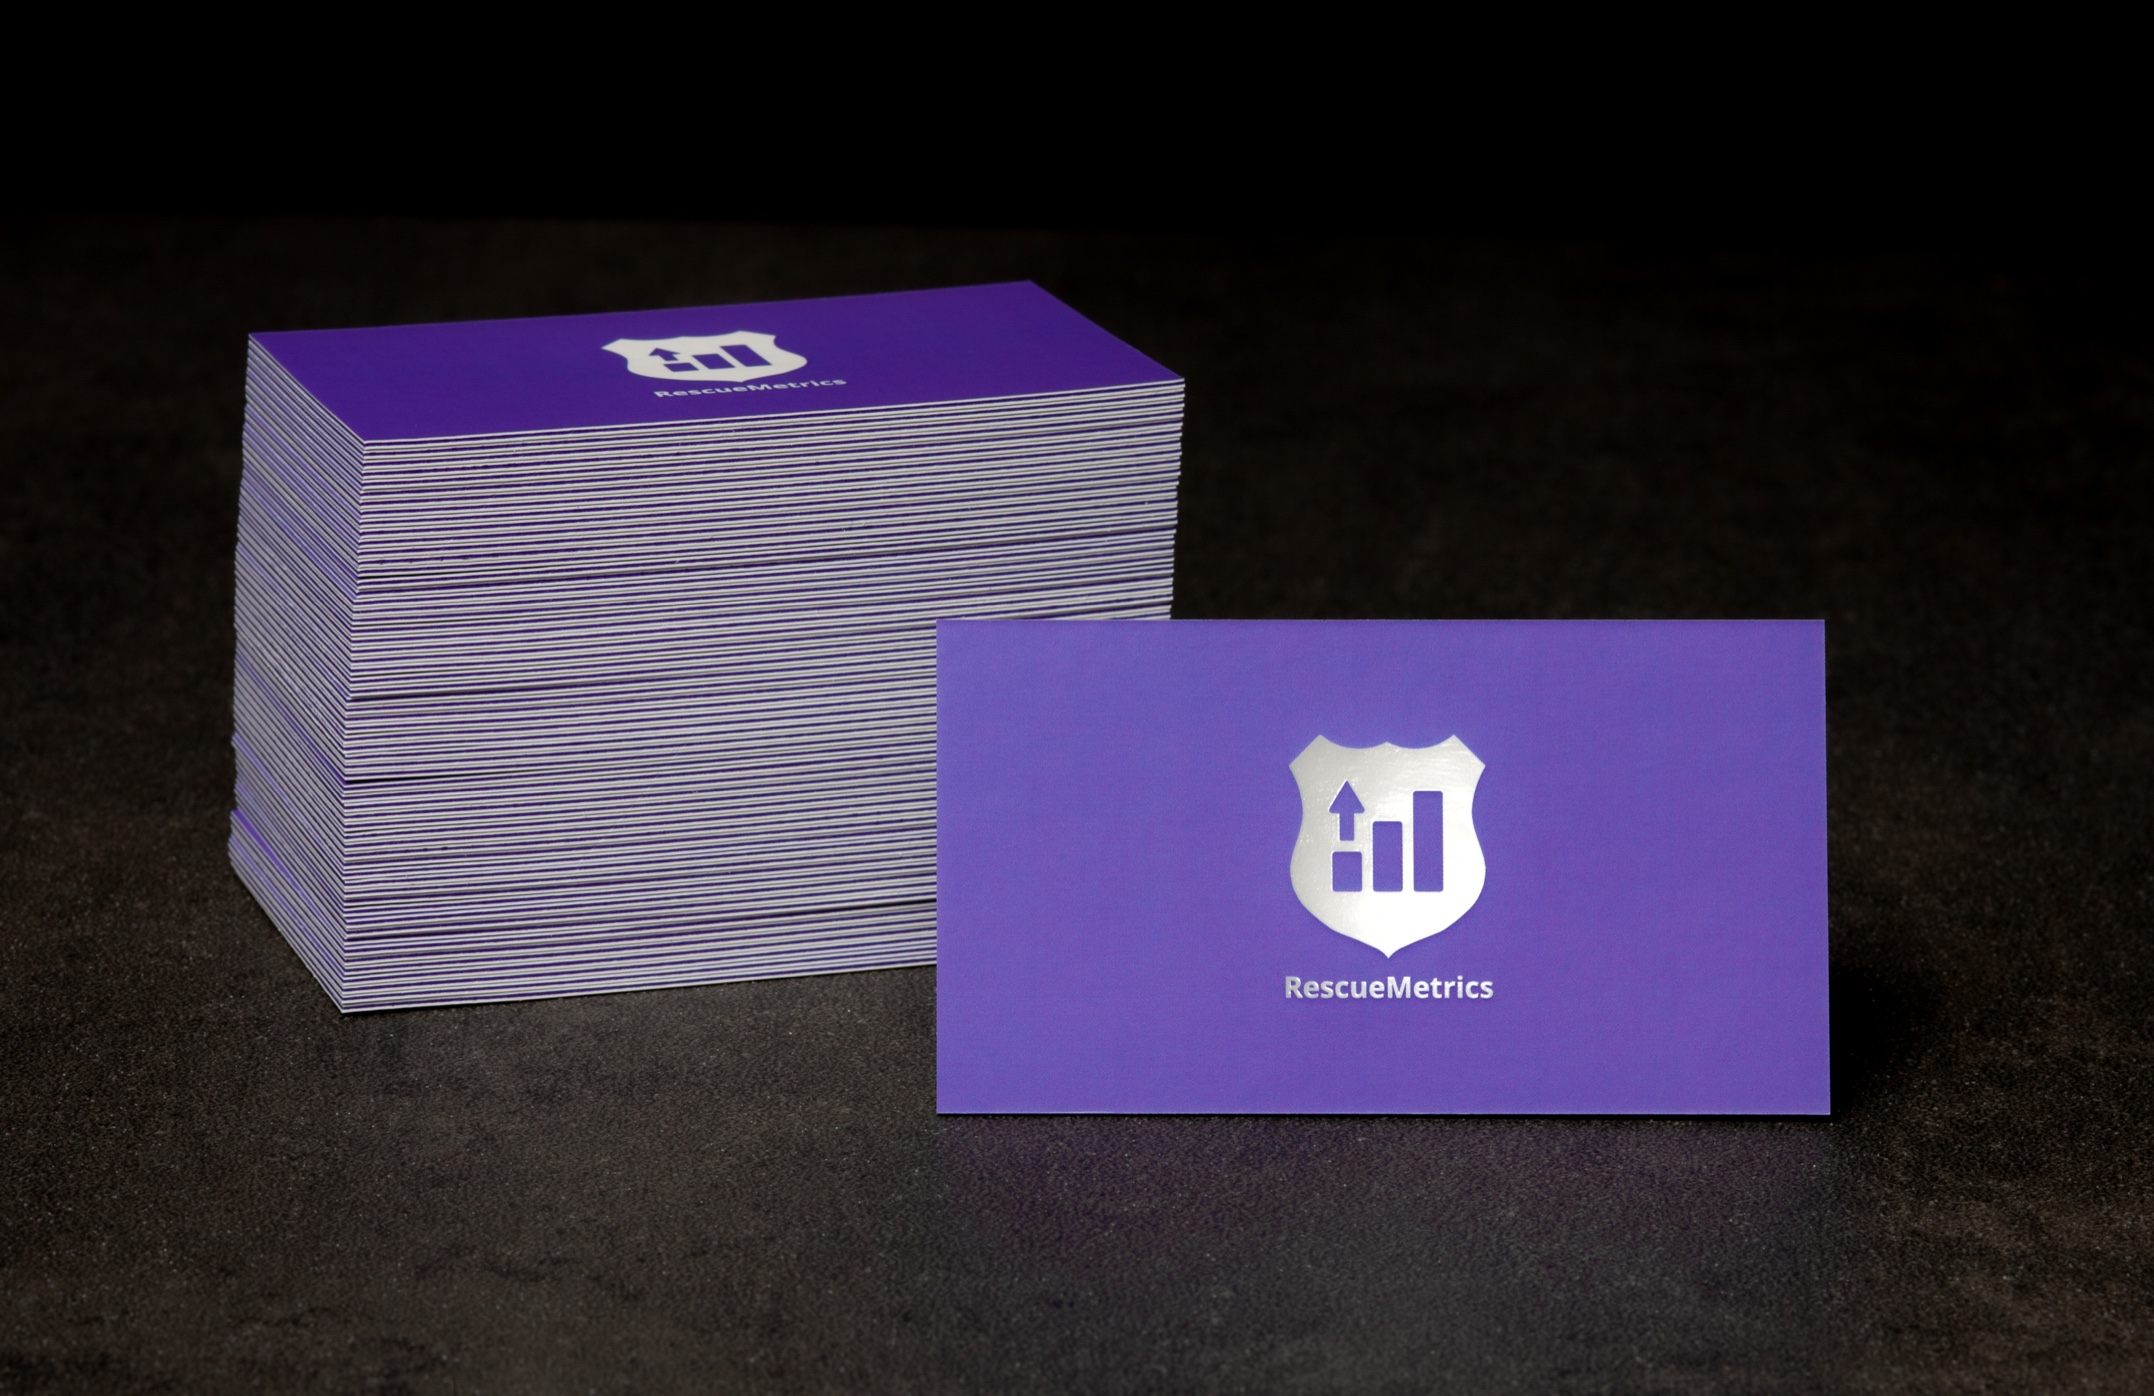 Elevating Impressions: RescueMetrics' Distinctive Triple-Mounted Business Cards